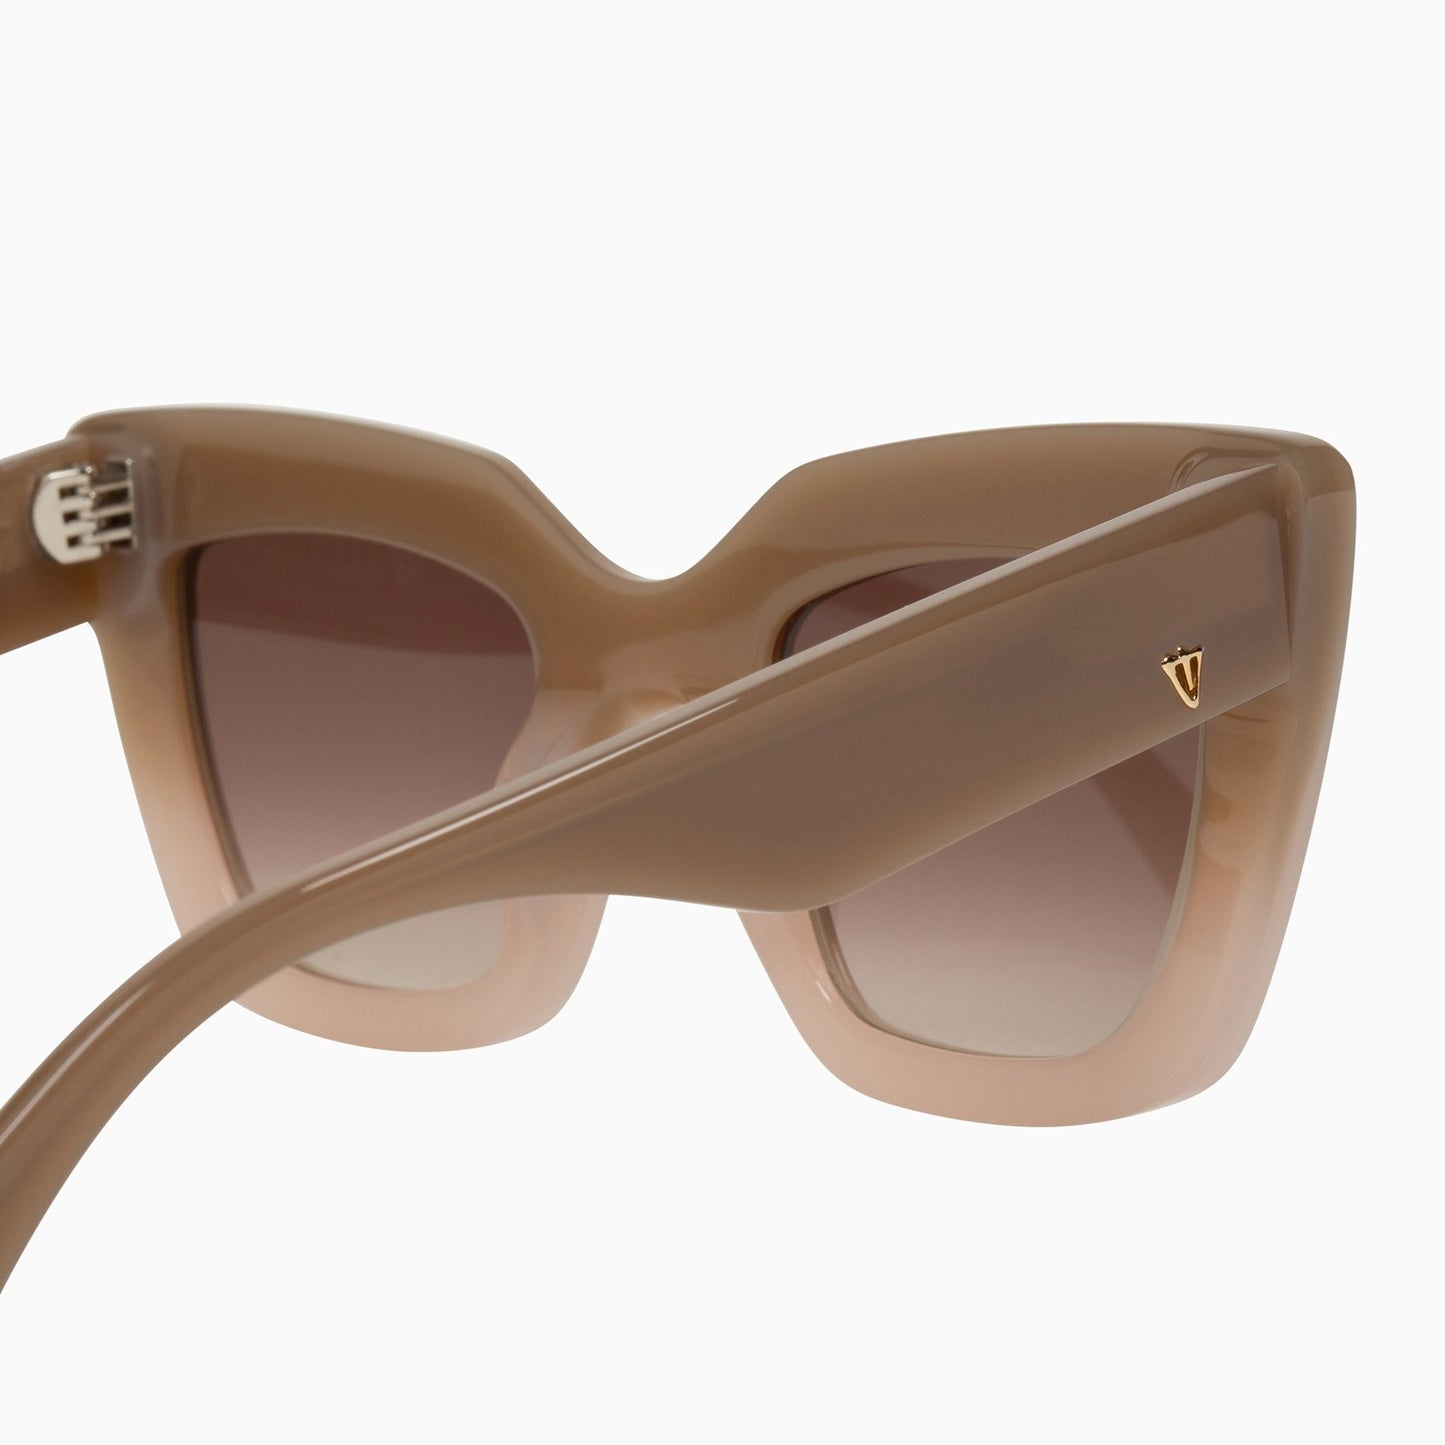 Valley - Brigada Sunglasses - Toffee Fade to Ivory / Brown Gradient Lens